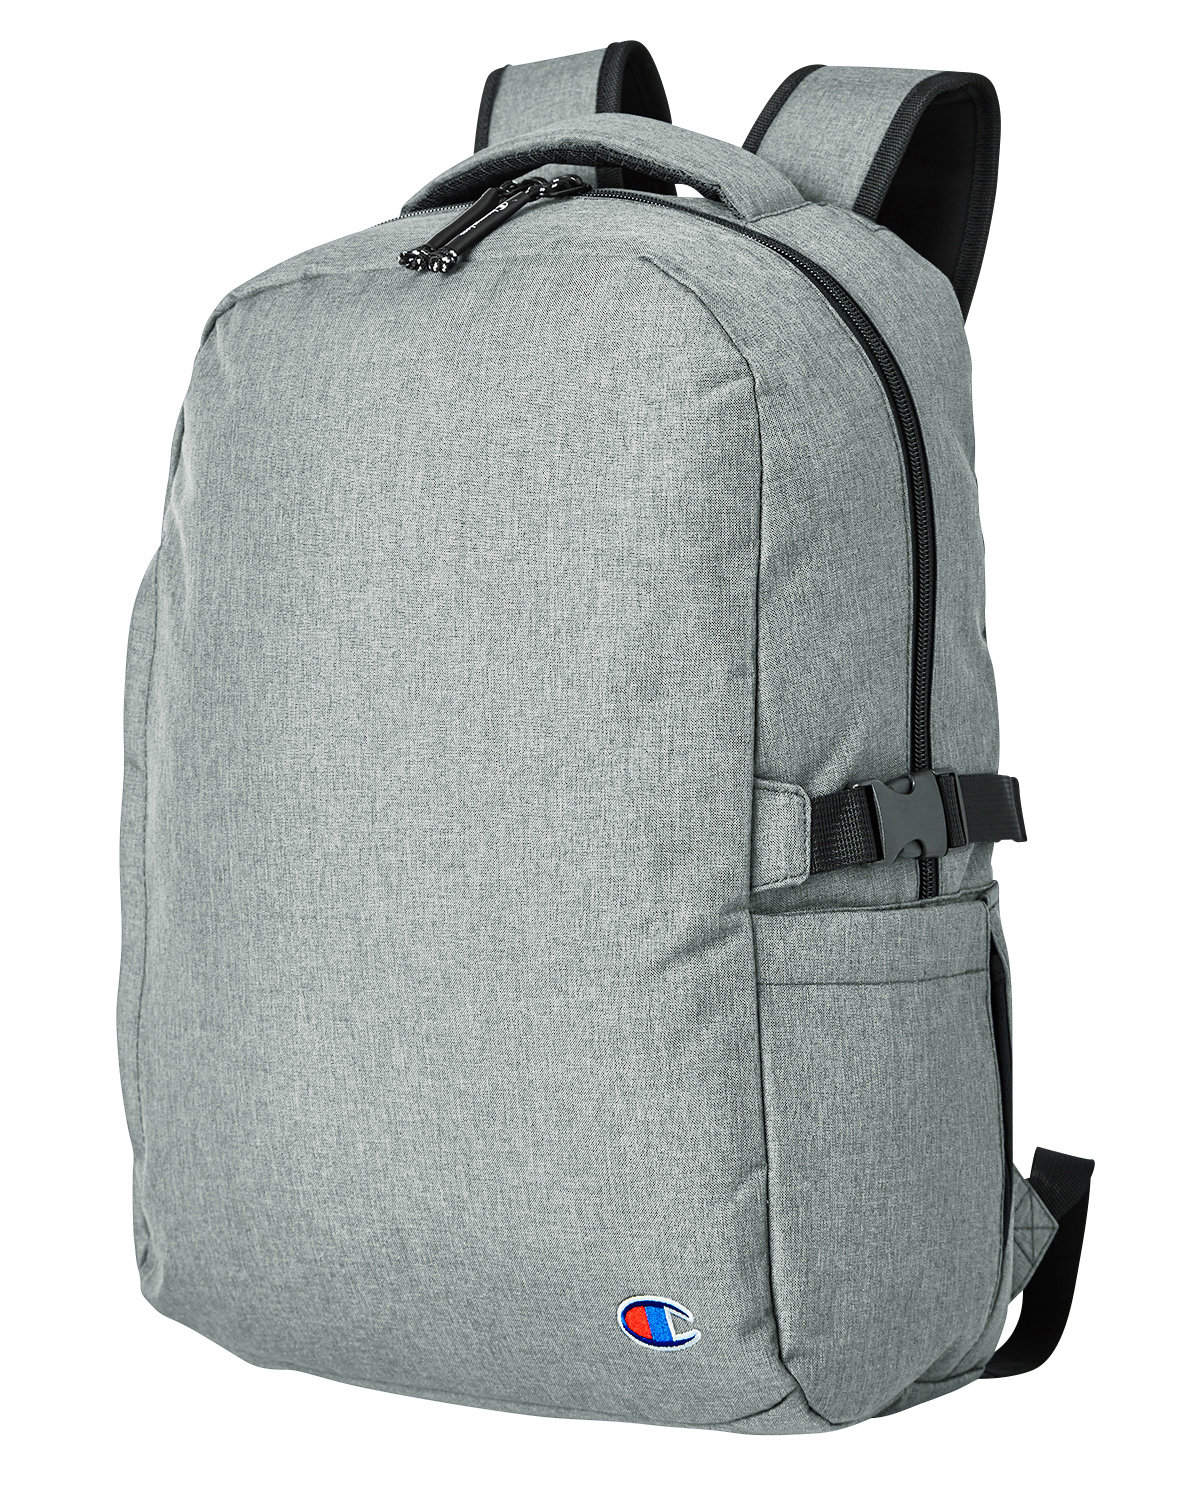 Champion Adult Laptop Backpack